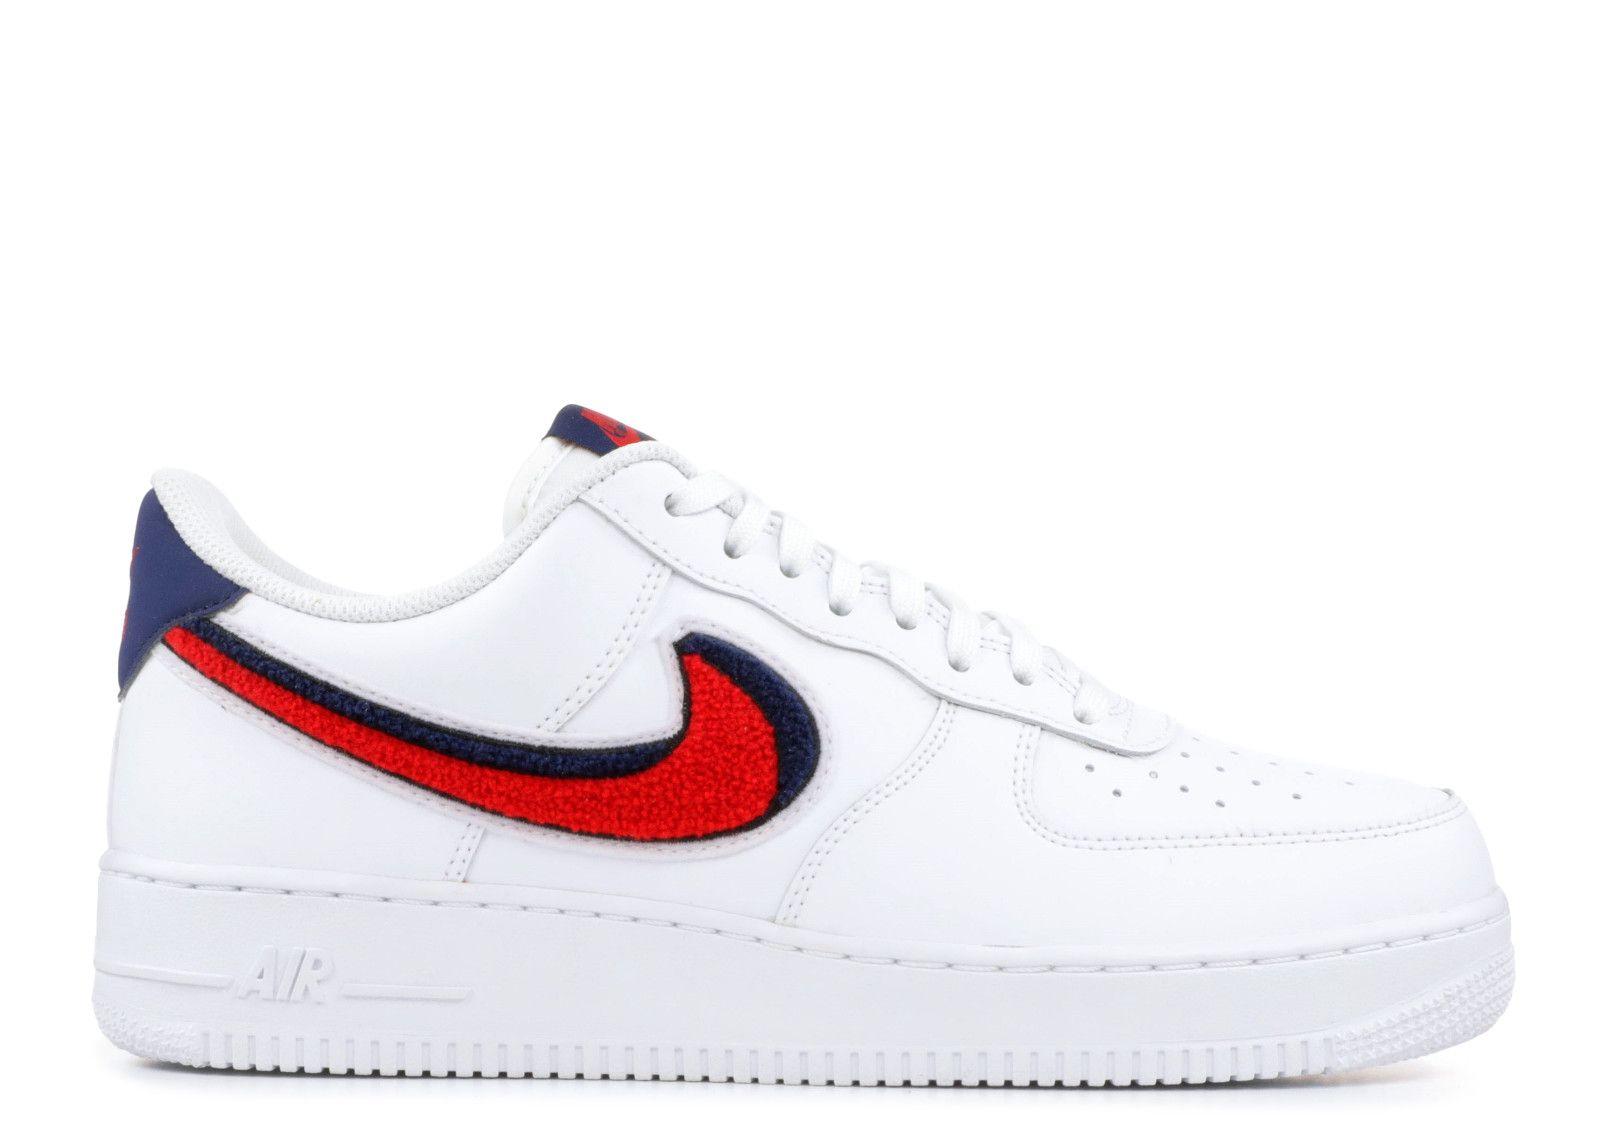 Red White Nike Logo - Air Force 1 07 LV8 Chenille Swoosh 106